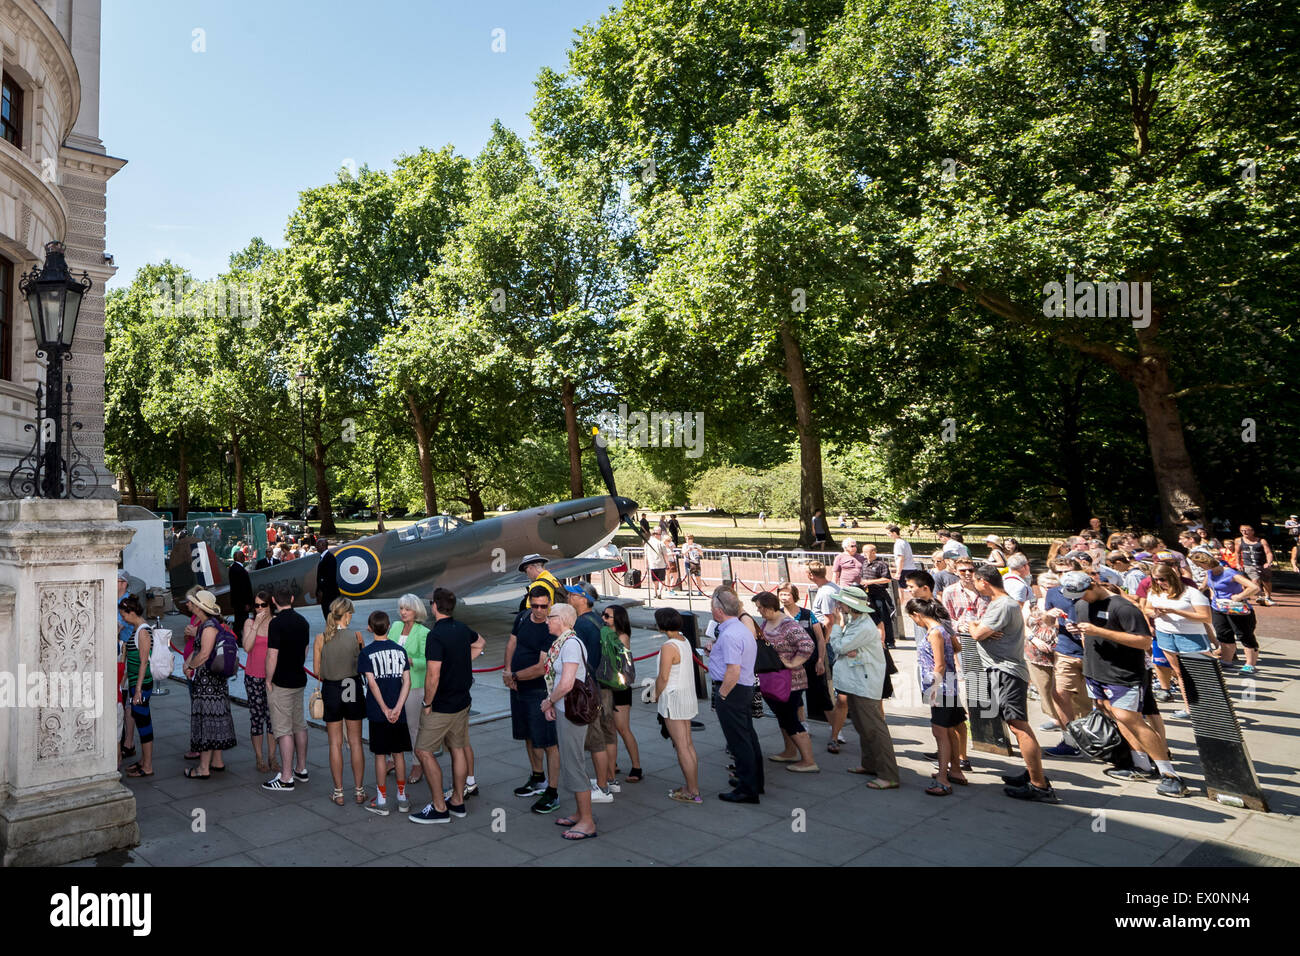 London, UK. 3rd July, 2015. A Vickers Supermarine Spitfire Mk 1A aircraft is pictured outside the Churchill War Rooms before its sale by Christie’s auction house Credit:  Guy Corbishley/Alamy Live News Stock Photo